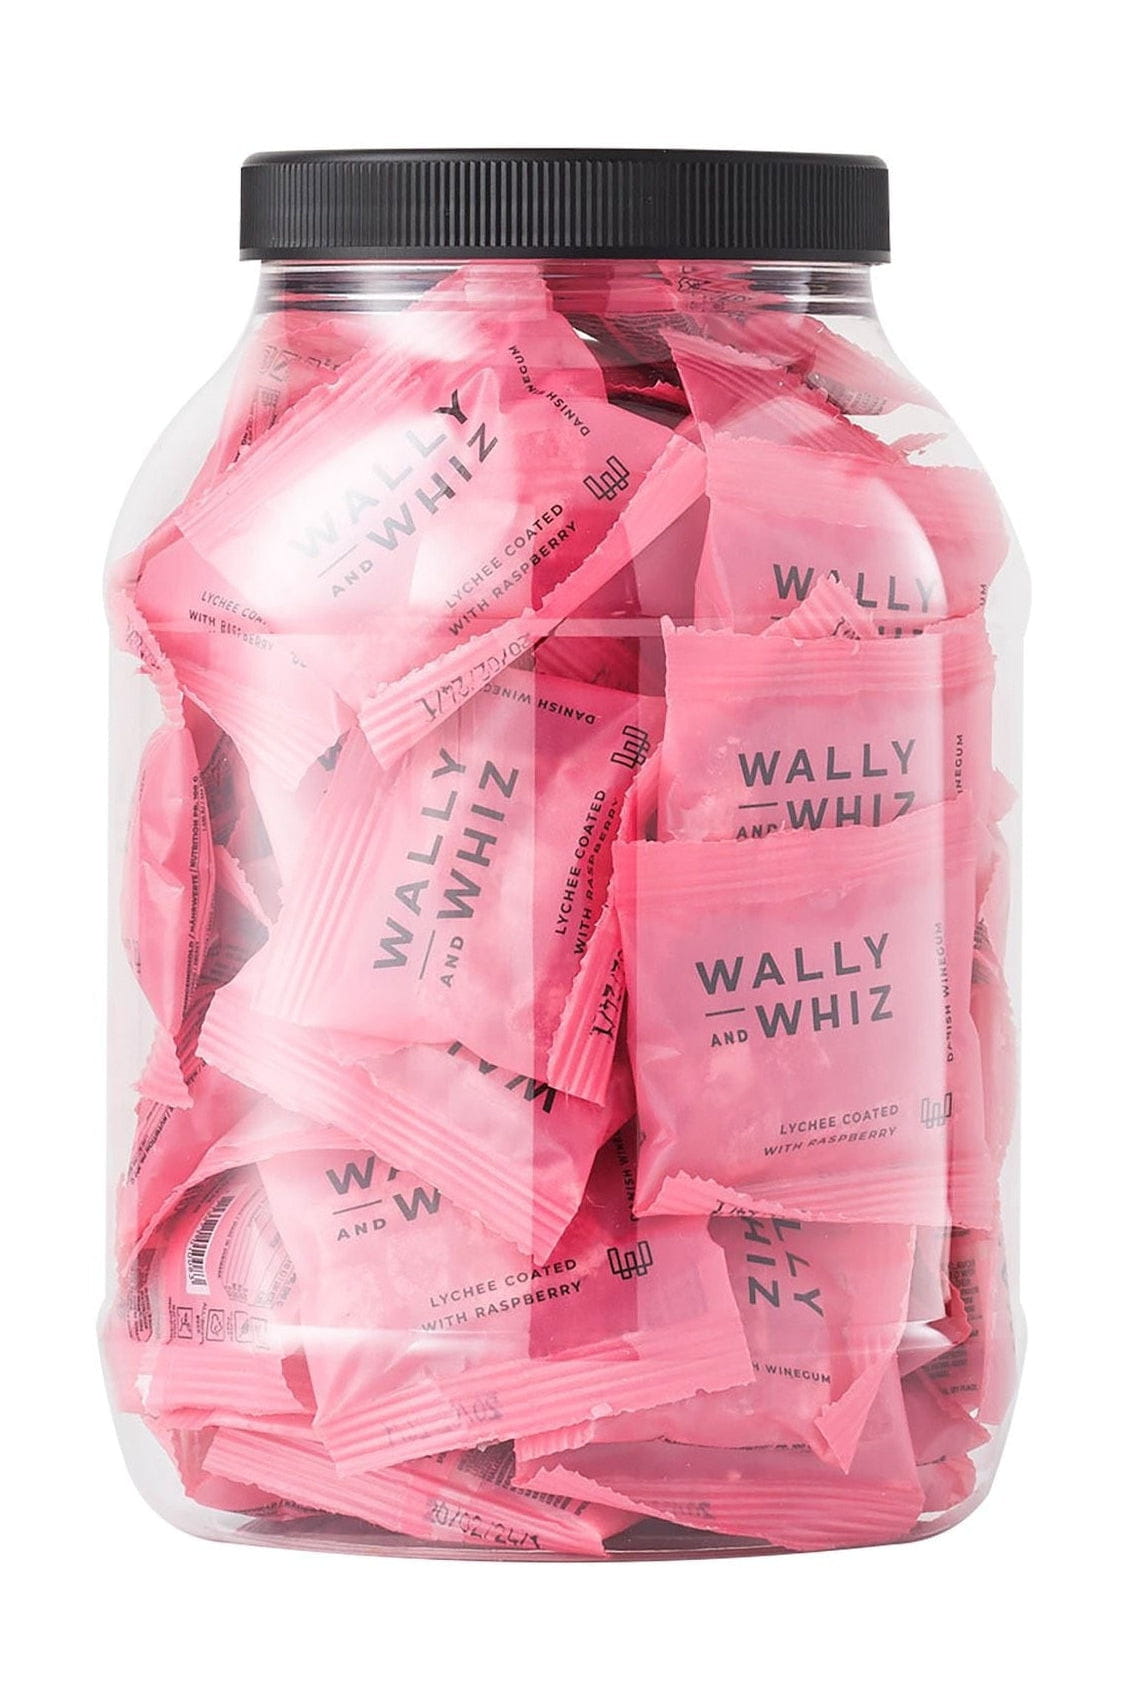 Wally And Whiz Wine Gum Jar With 50 Flowpacks, Lychee With Raspberry